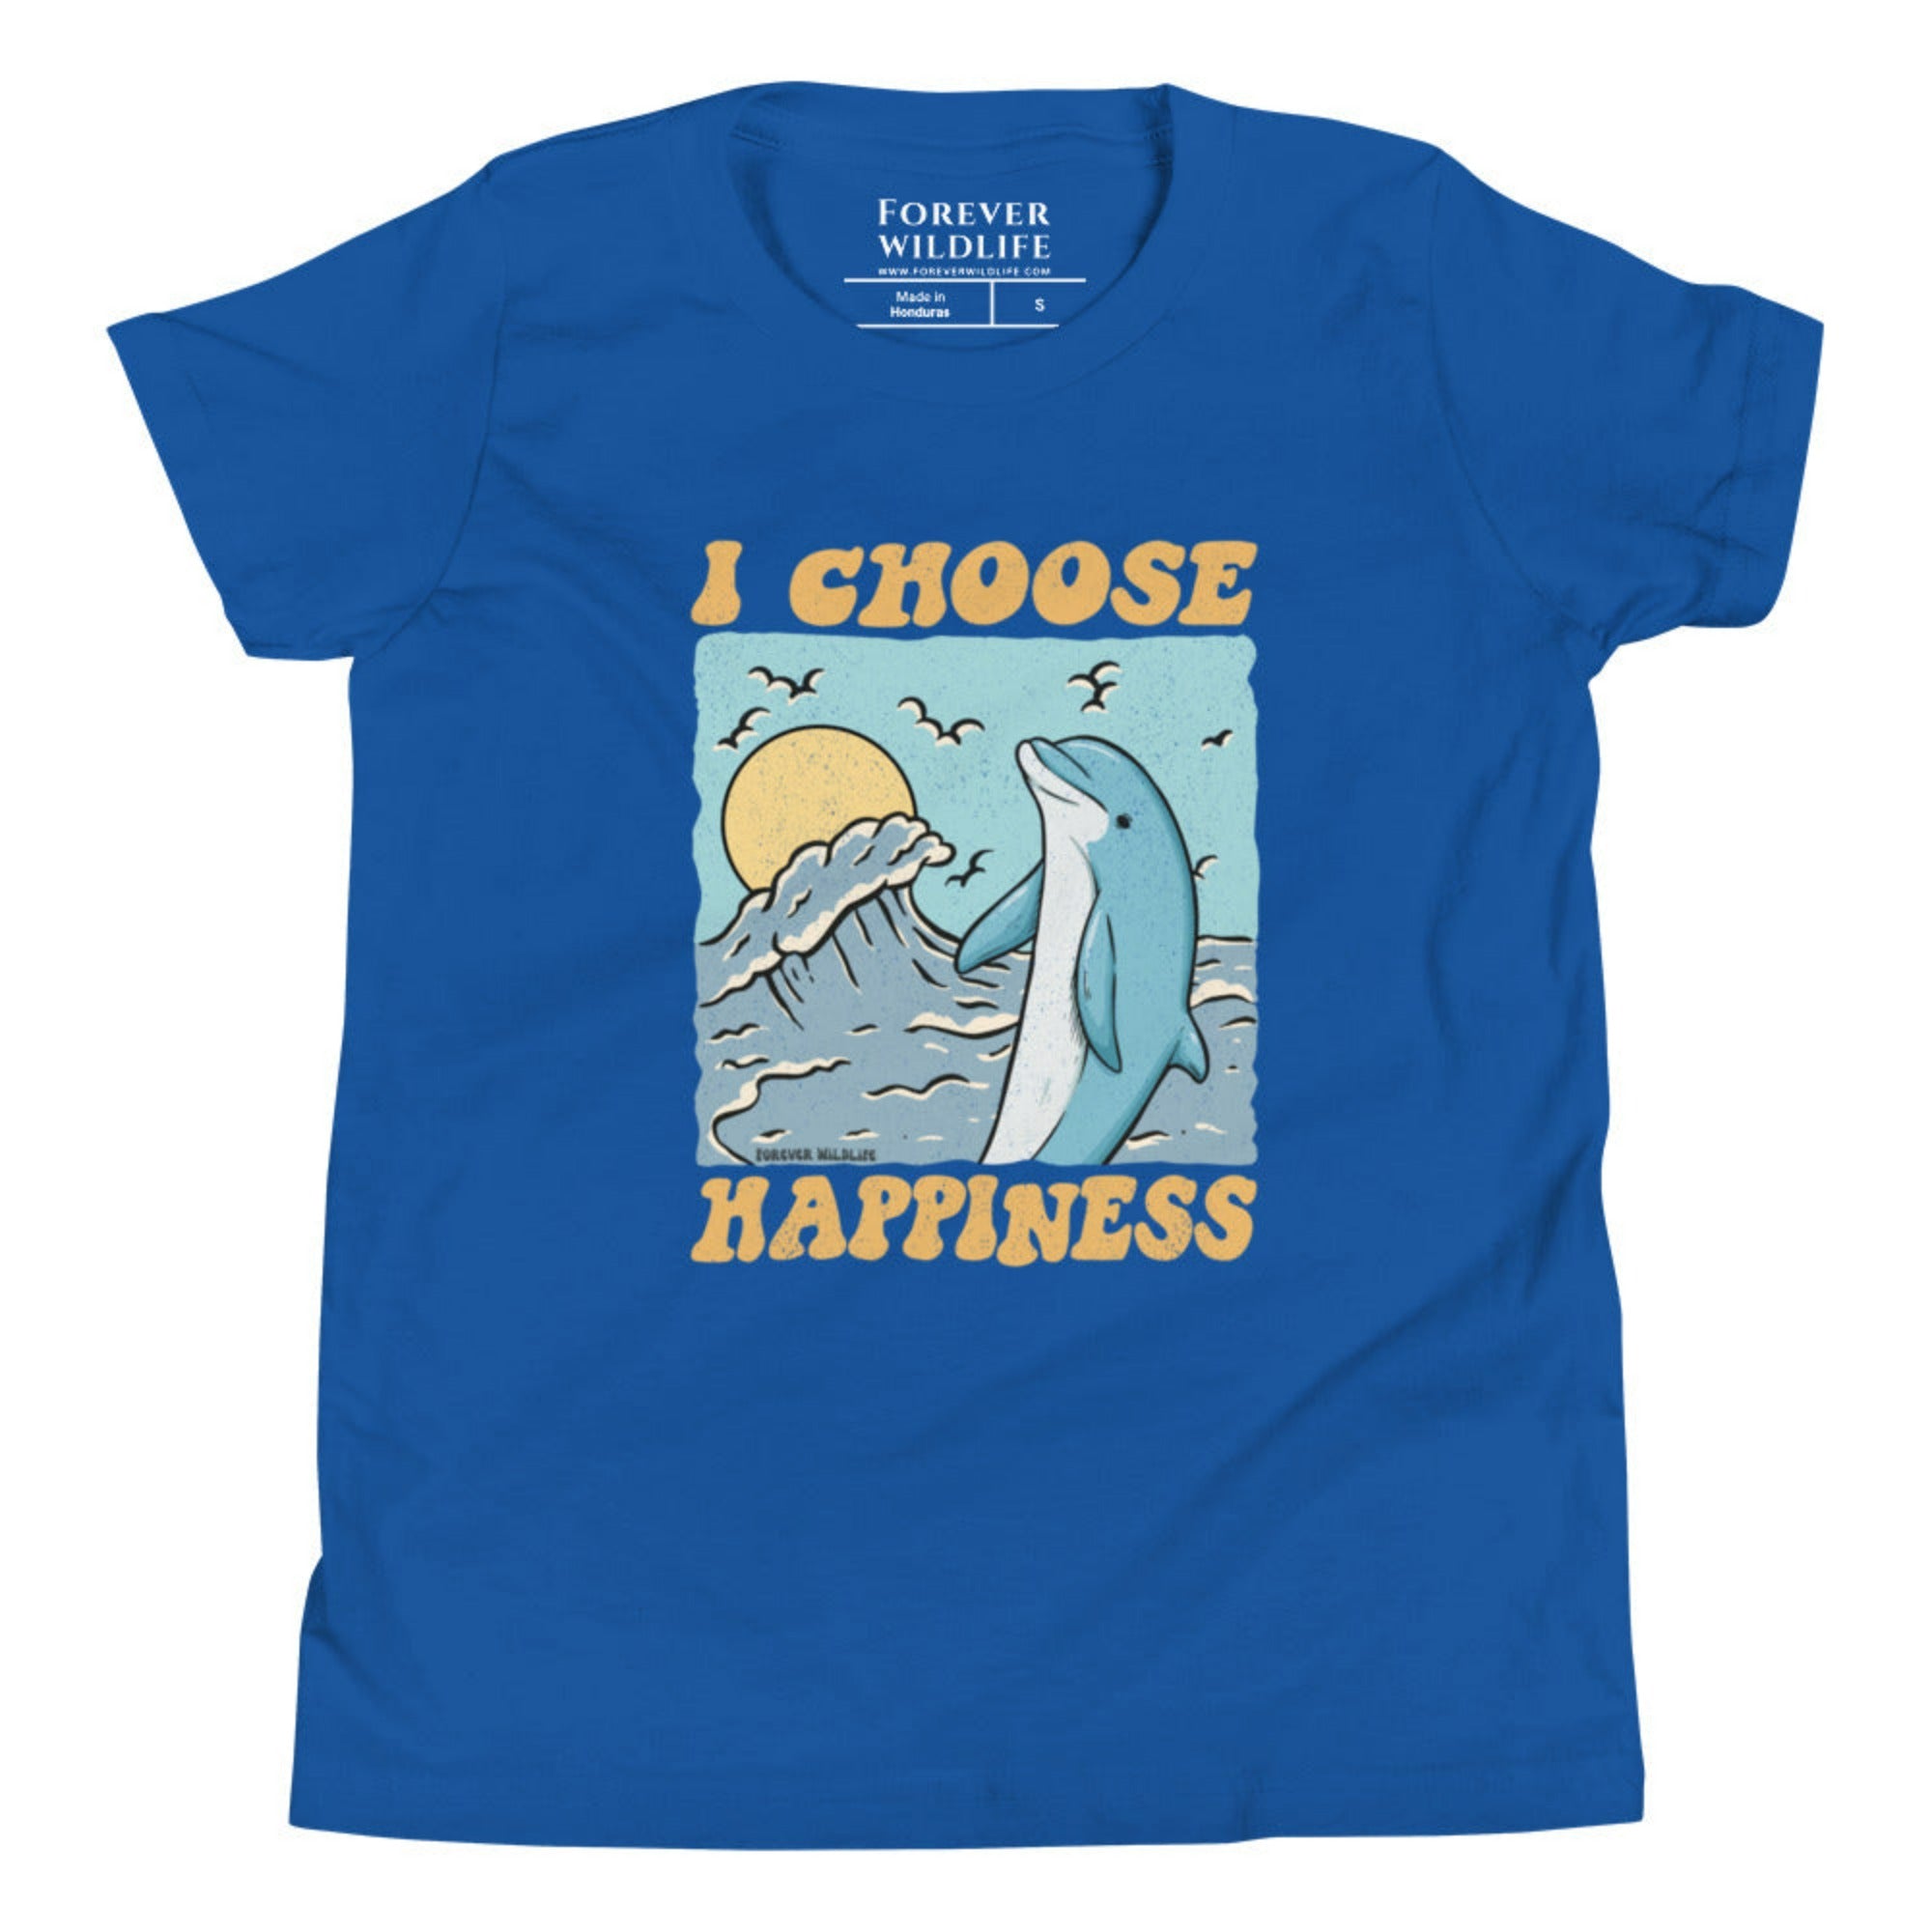 True Royal Dolphin Youth T-Shirt with dolphin graphic as part of Wildlife T-Shirts, Wildlife Clothing & Apparel by Forever Wildlife